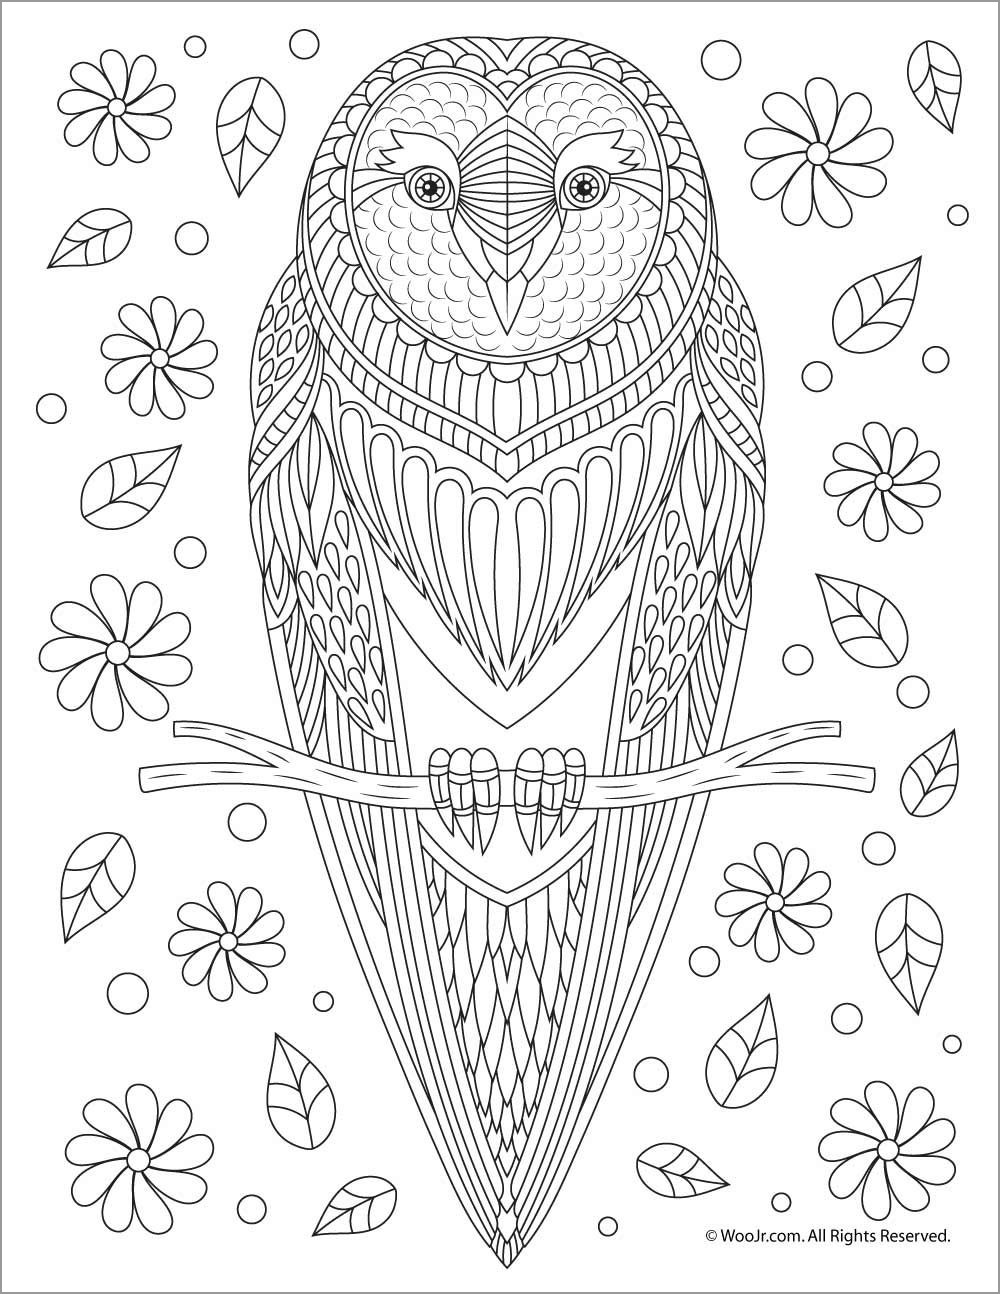 Mandala Owl Coloring Page for Adults